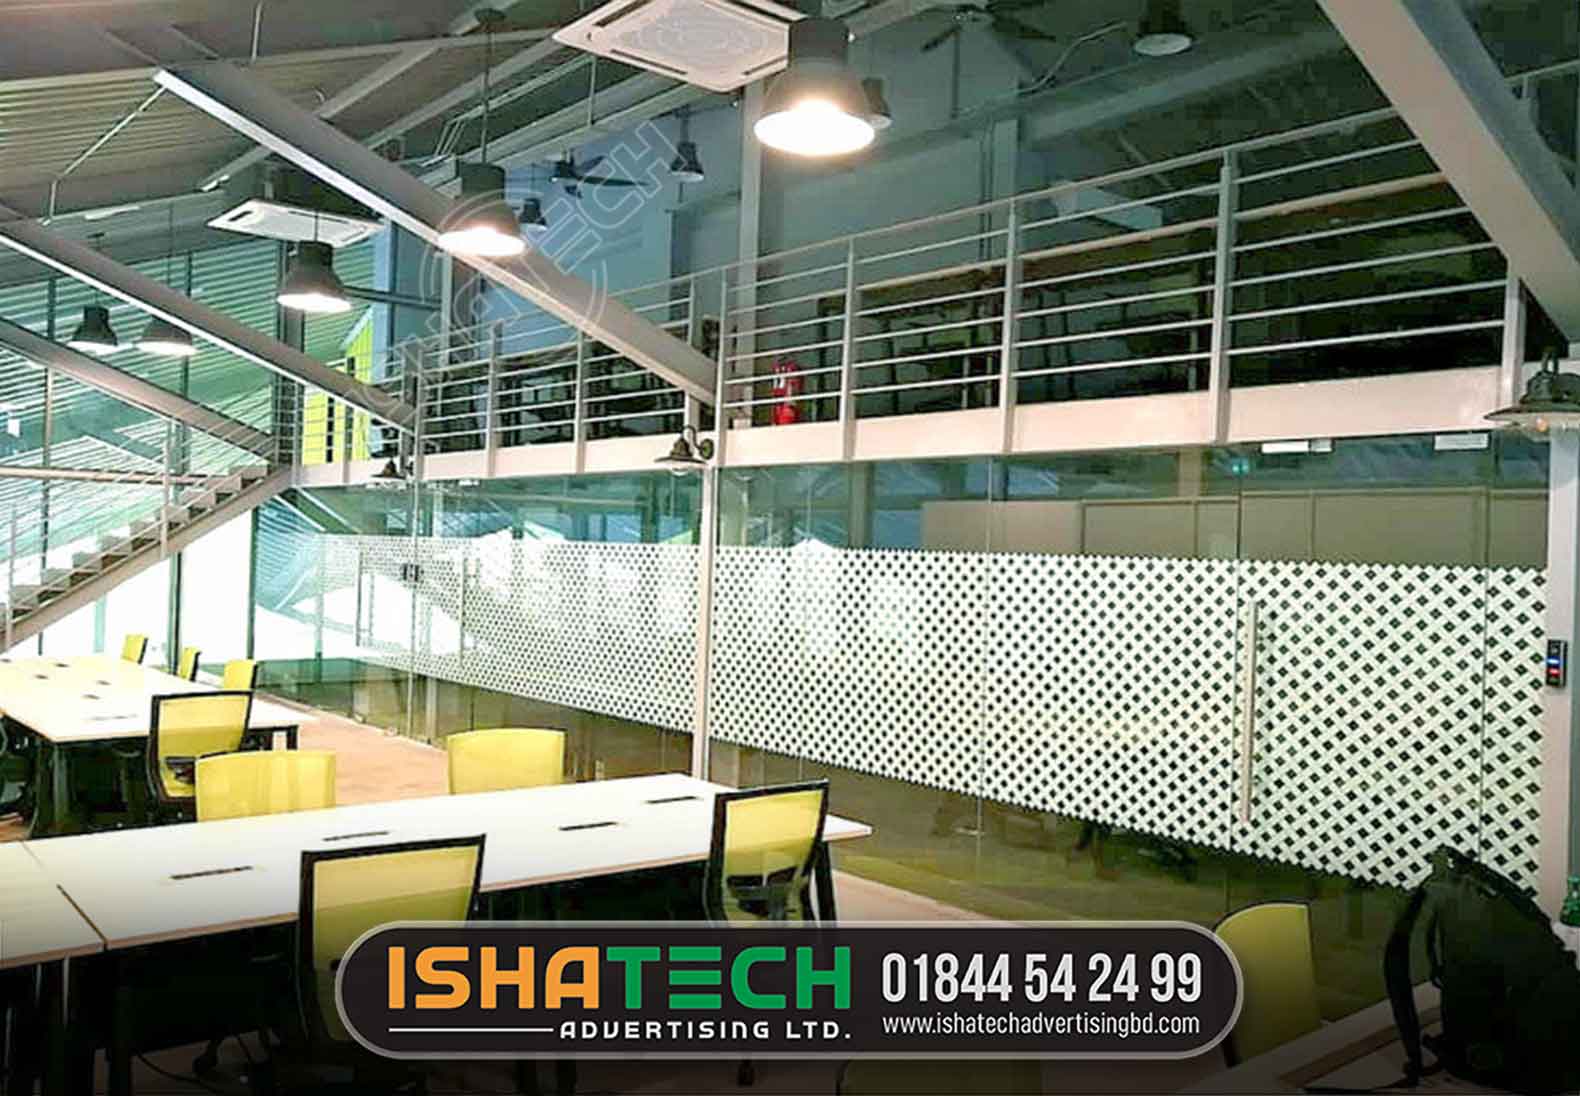 Ishatech Advertising is a renowned provider of top-tier frosted glass sticker services in Dhaka, Bangladesh. Our specialty is using our excellent frosted glass designs to add privacy and luxury to your rooms. Our talented craftspeople expertly install frosted glass stickers to windows and doors to create eye-catching designs that perfectly balance style and utility. We provide a range of options, so you may choose from a delicate frosted glass sheet or a frosted glass texture design. With Ishatech Advertising's unmatched skill in frosted glass stickers—every detail is expertly crafted—you may enhance the ambience of your surroundings.